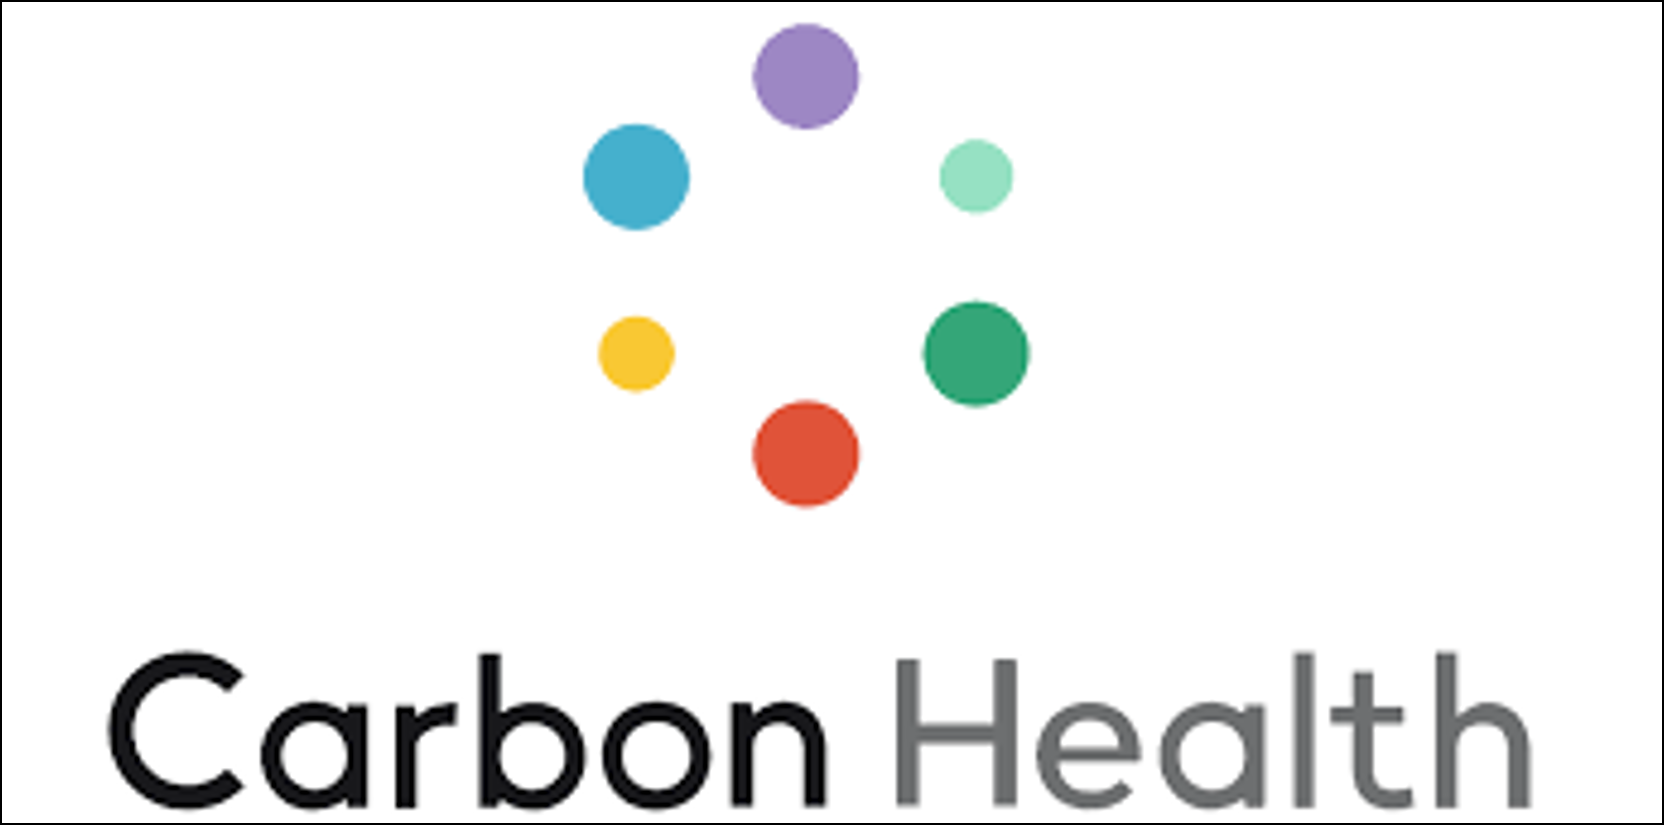 Carbon Health Revolutionizes Healthcare with AI Charting in Its EHR